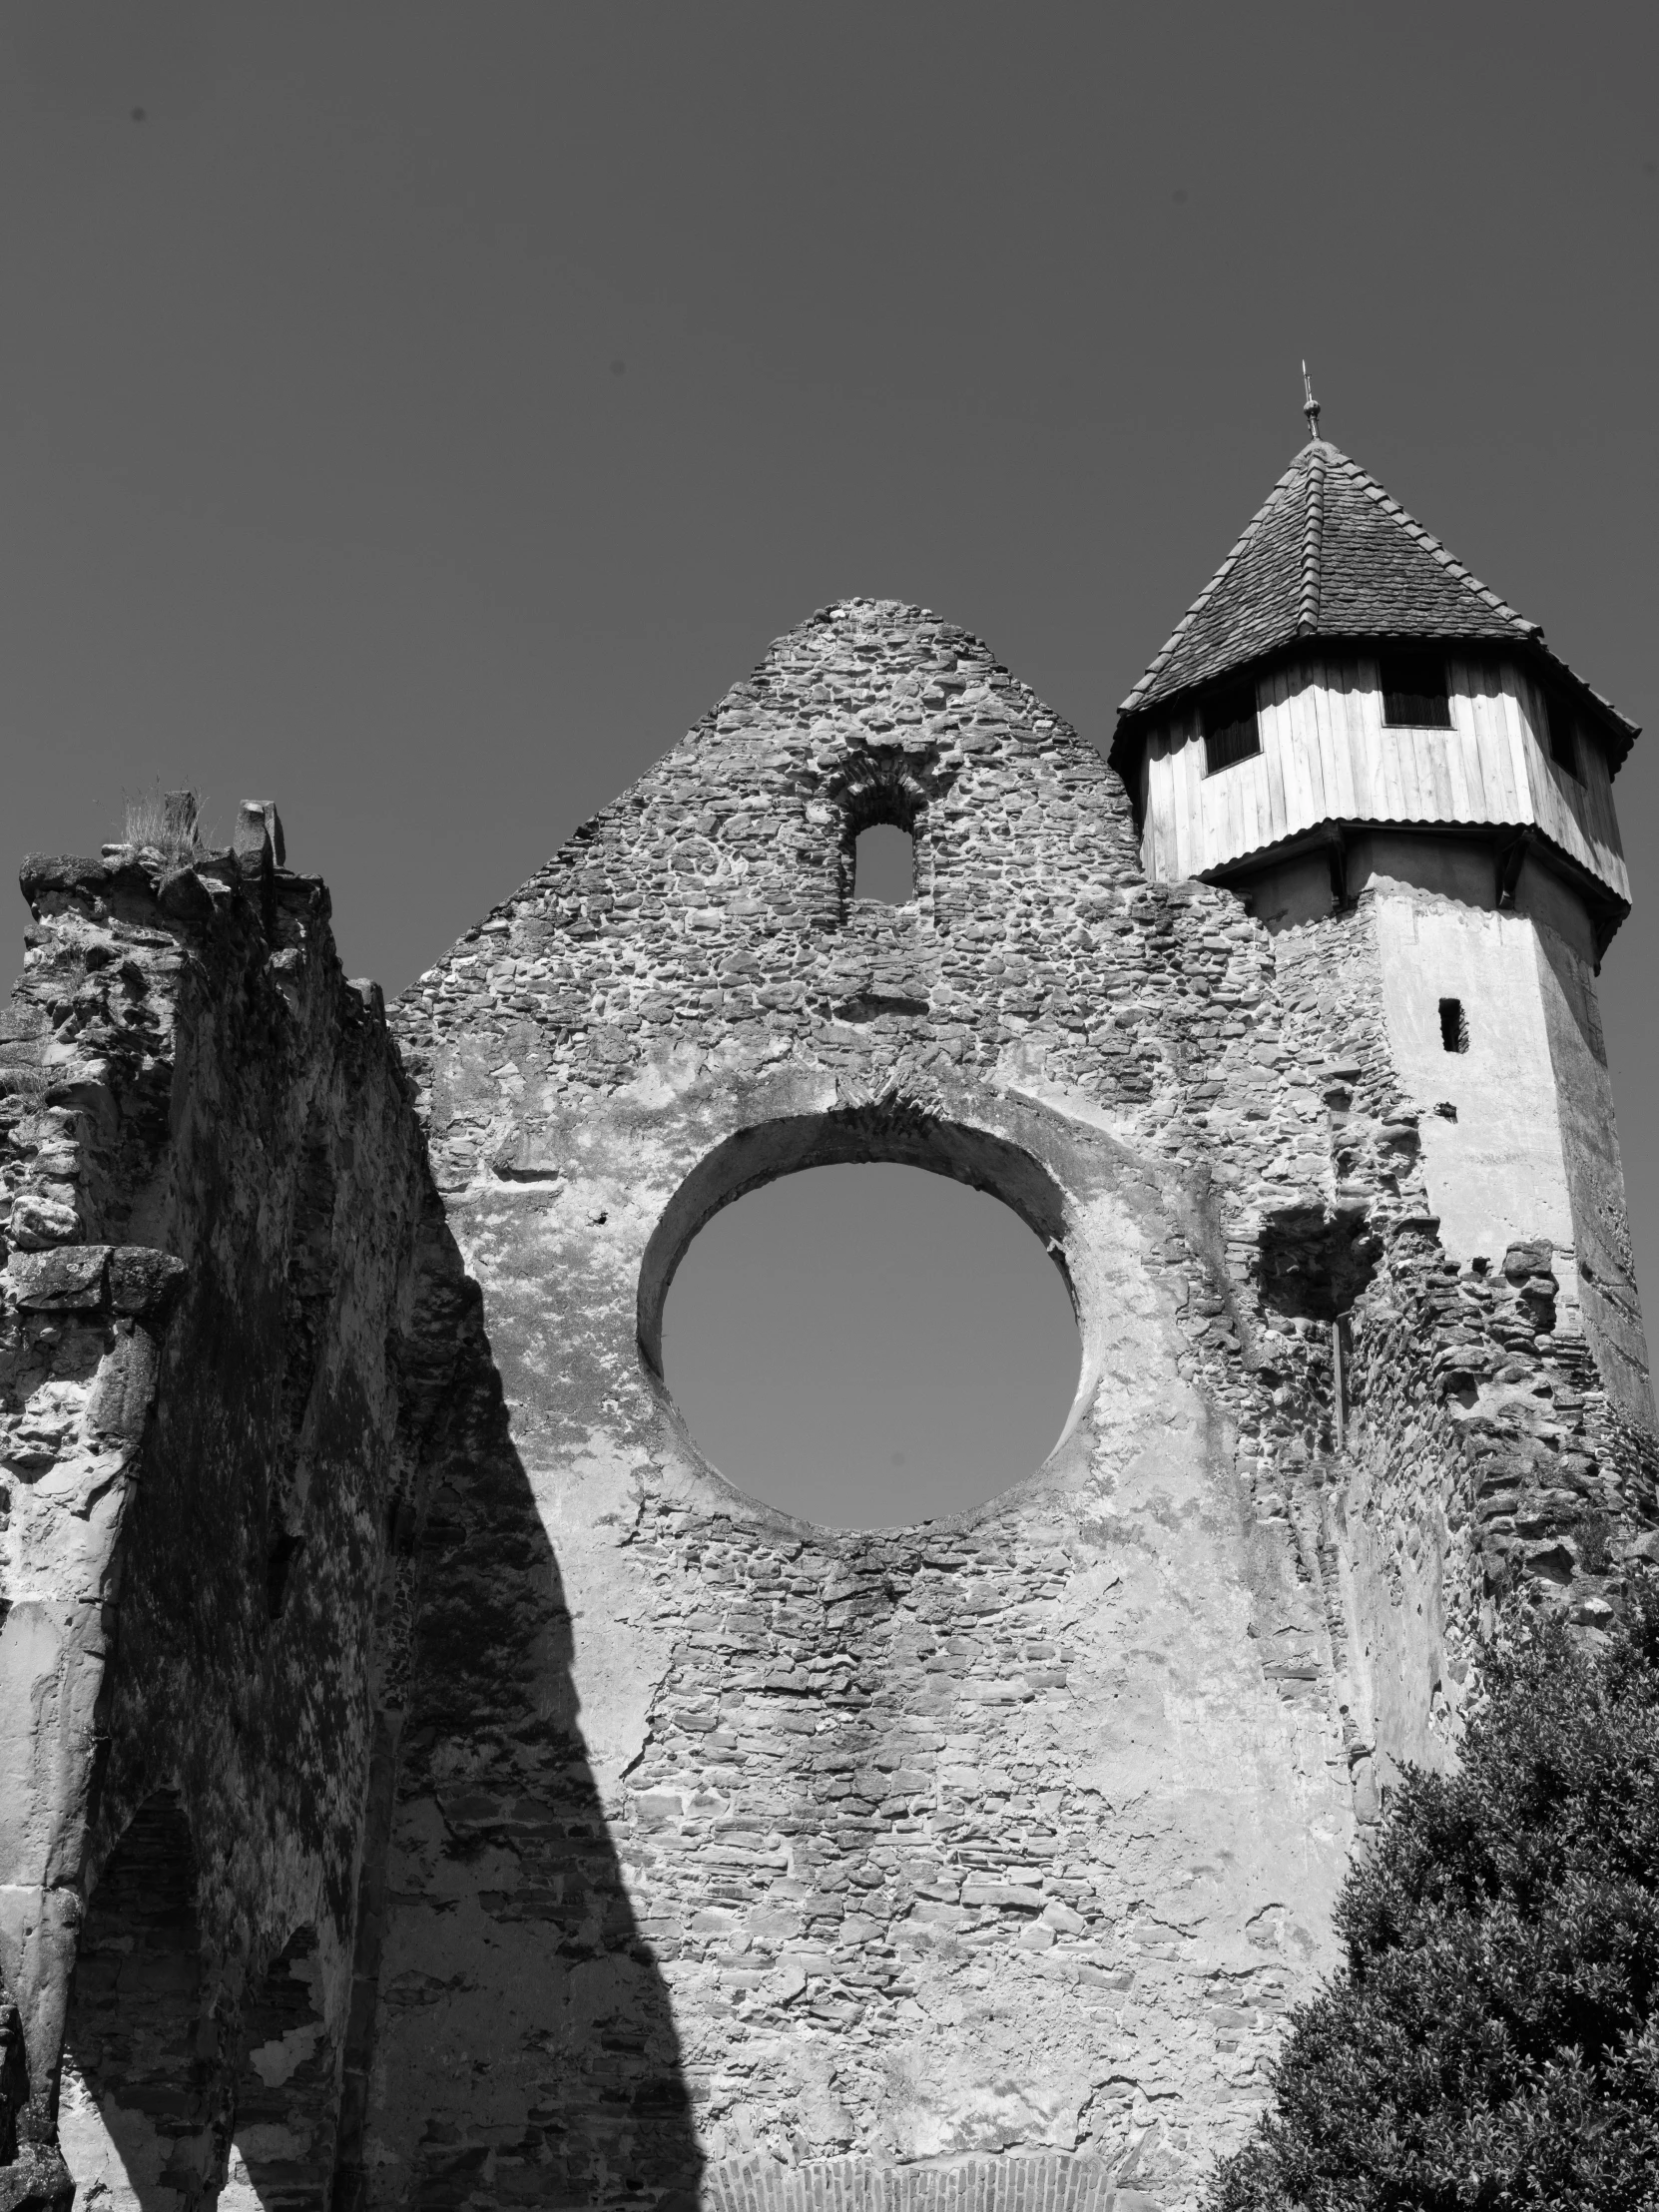 a black and white po of an old castle